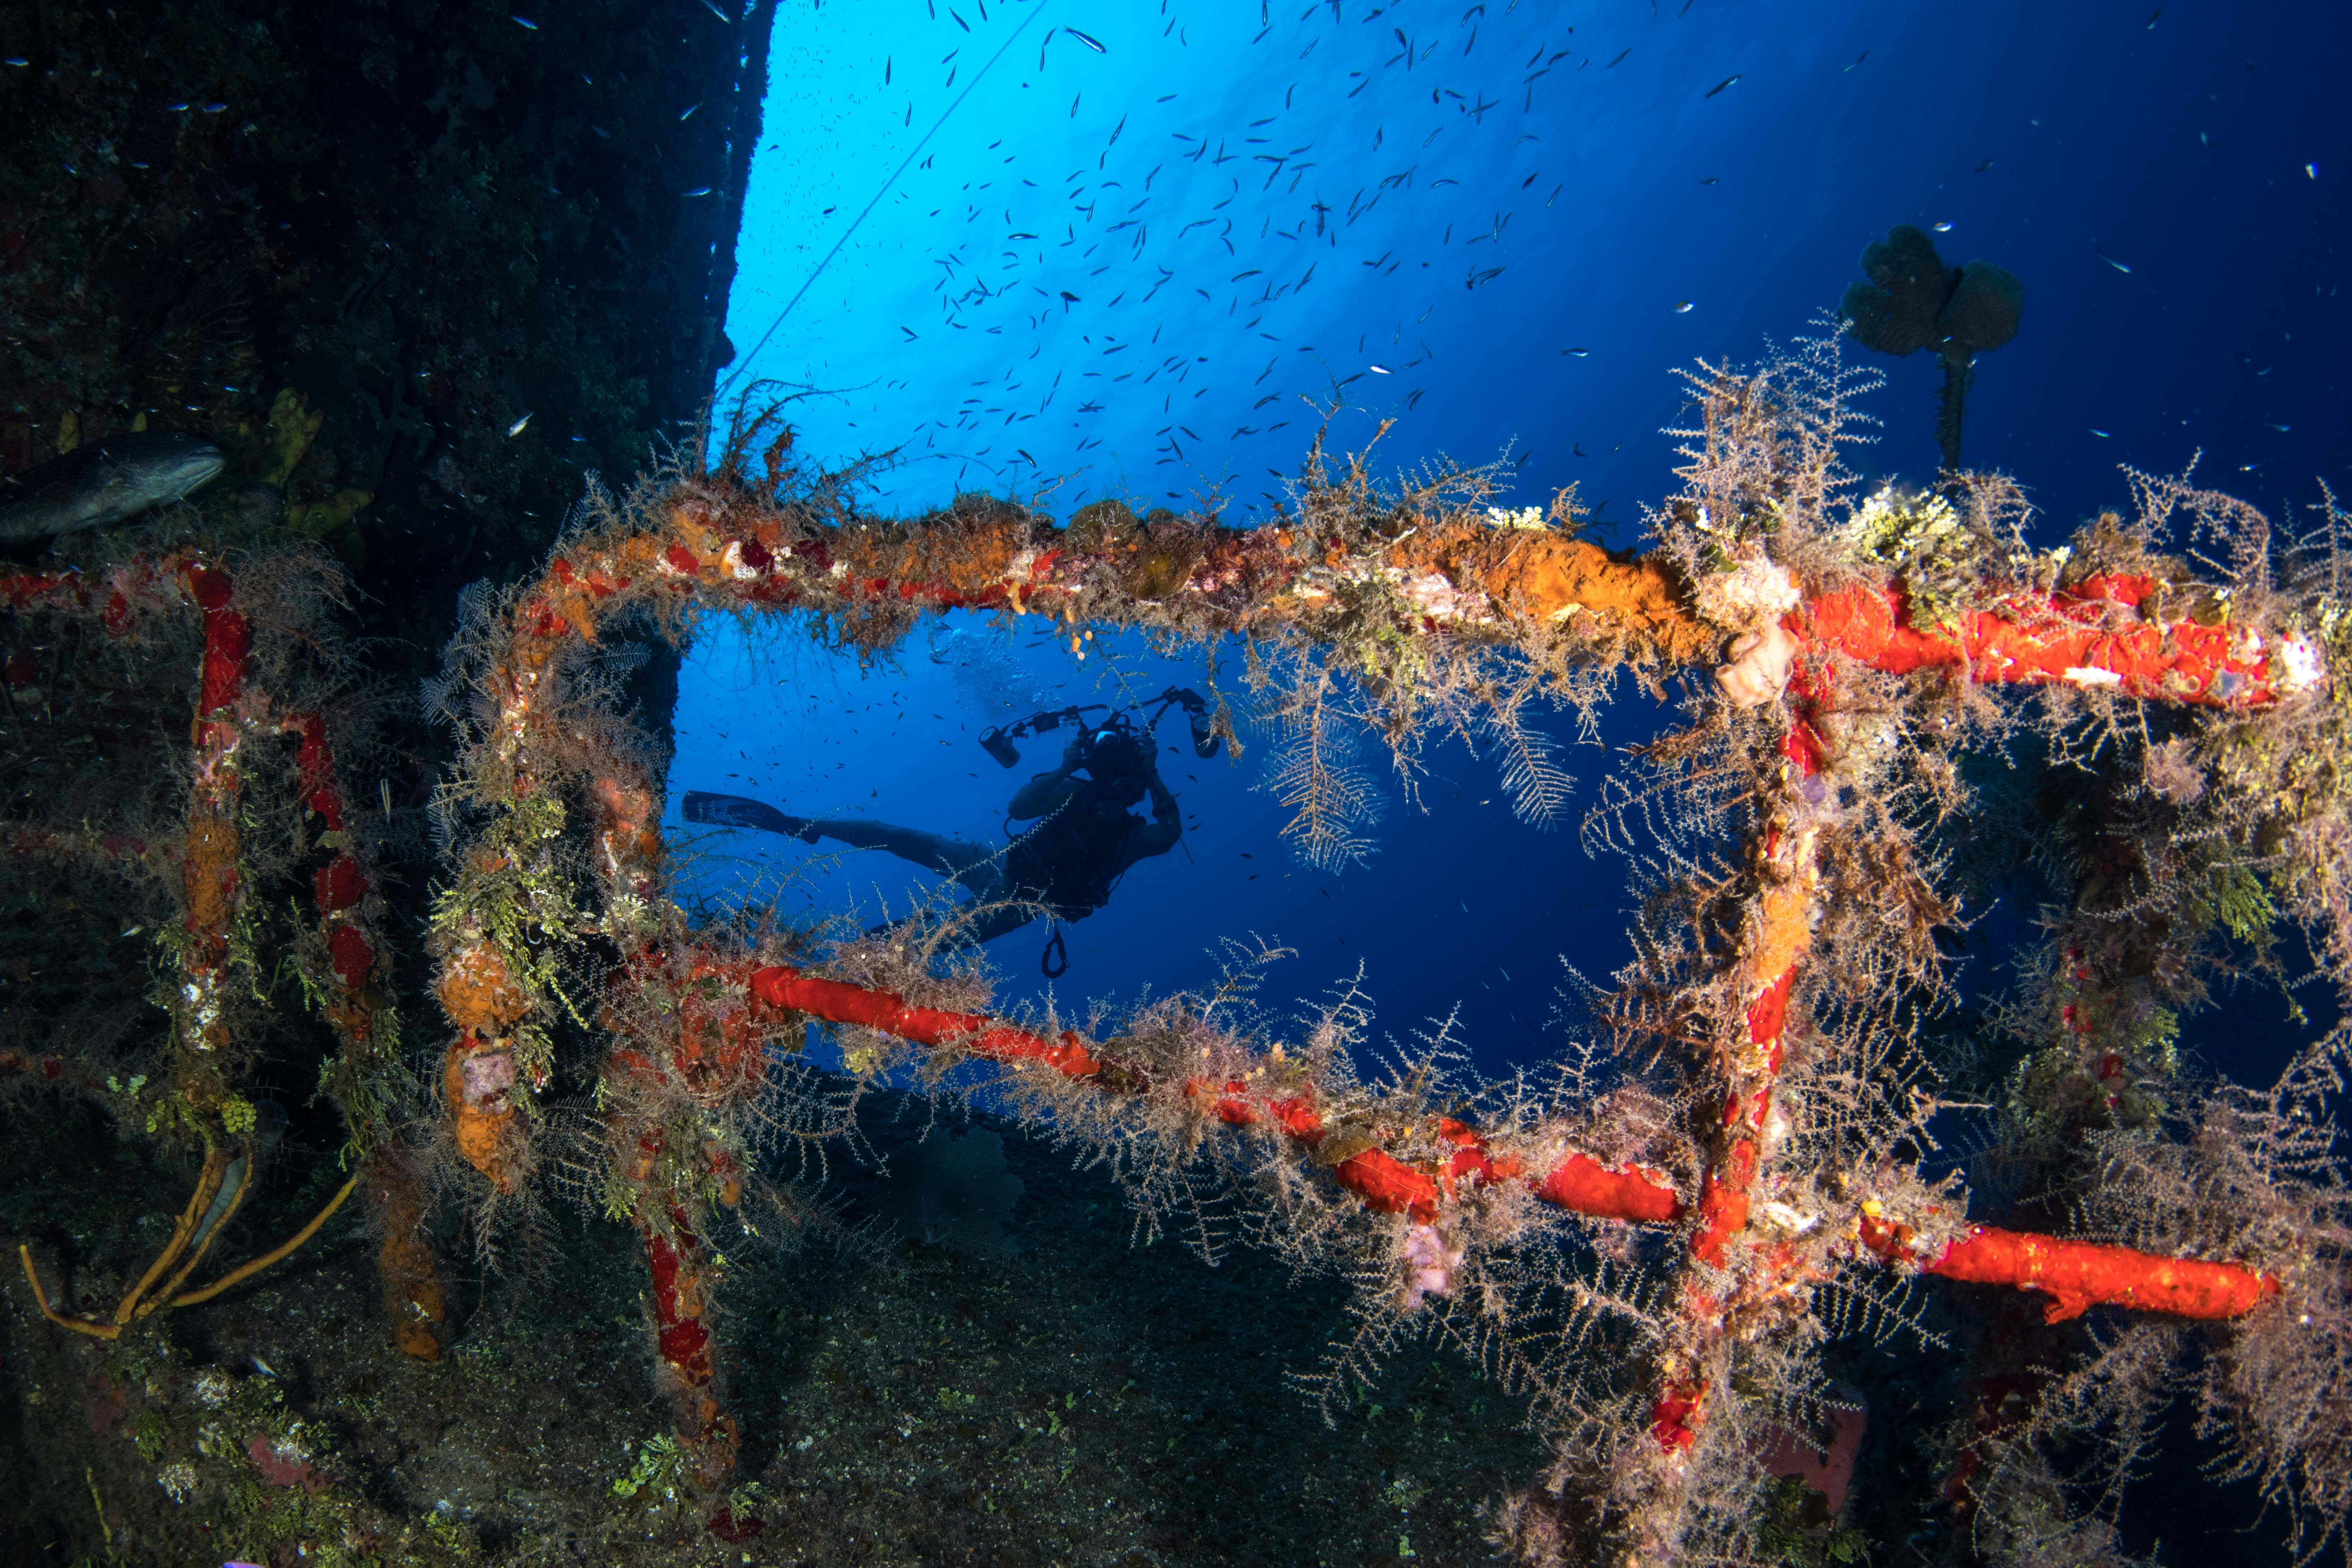 The railing of an artificially sunken ship is covered with marine wildlife. In the background, a diver holds a large underwater camera while taking photos of a school of fish.